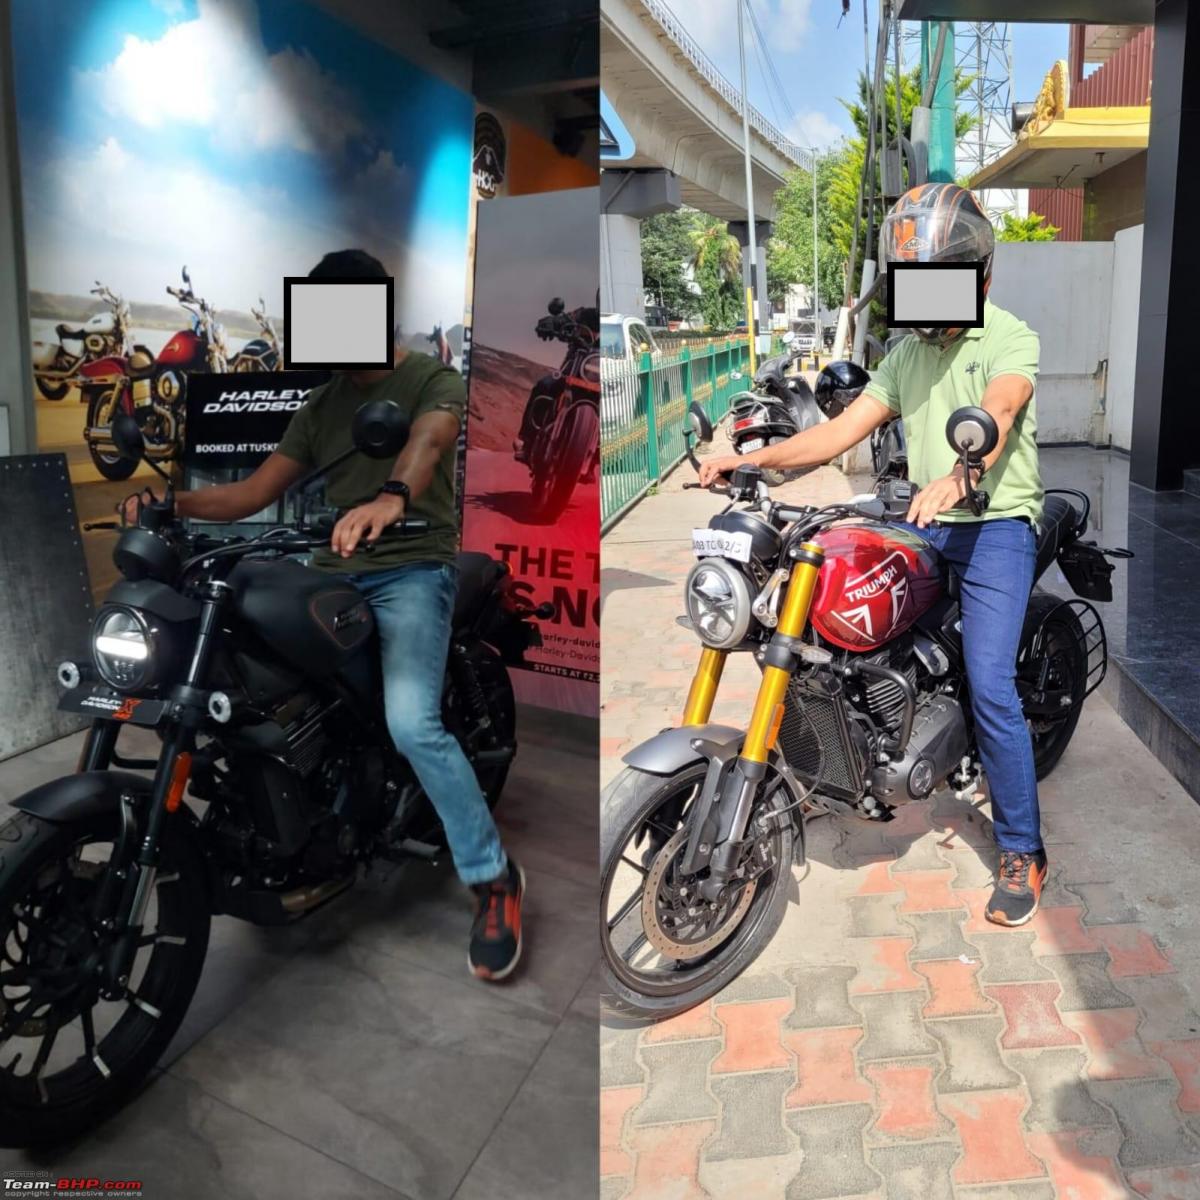 Checked out the Harley Davidson X440: First impressions of the bike, Indian, Member Content, Harley Davidson x440, Bike, motorcycles